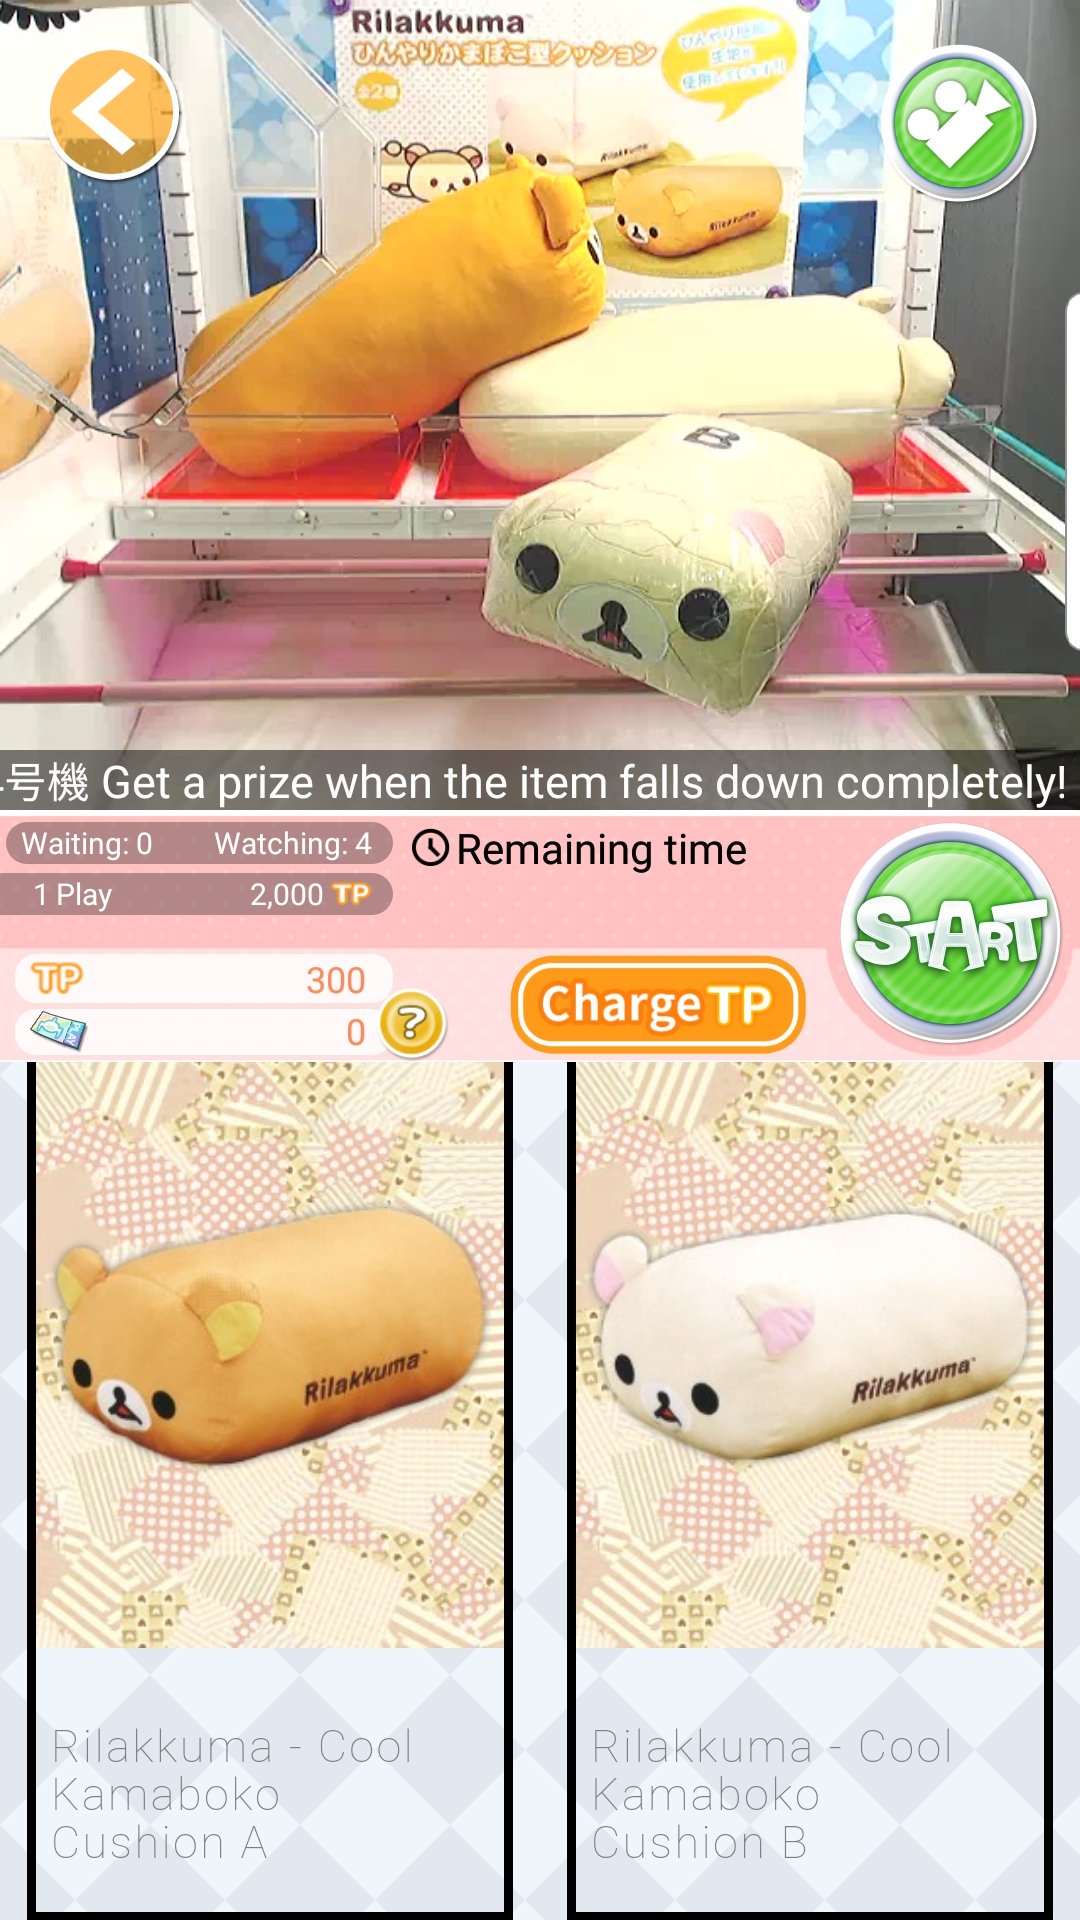 I Wasted Approximately ¥3896 On This Stupid Japanese Crane Game App And Learned Nothing